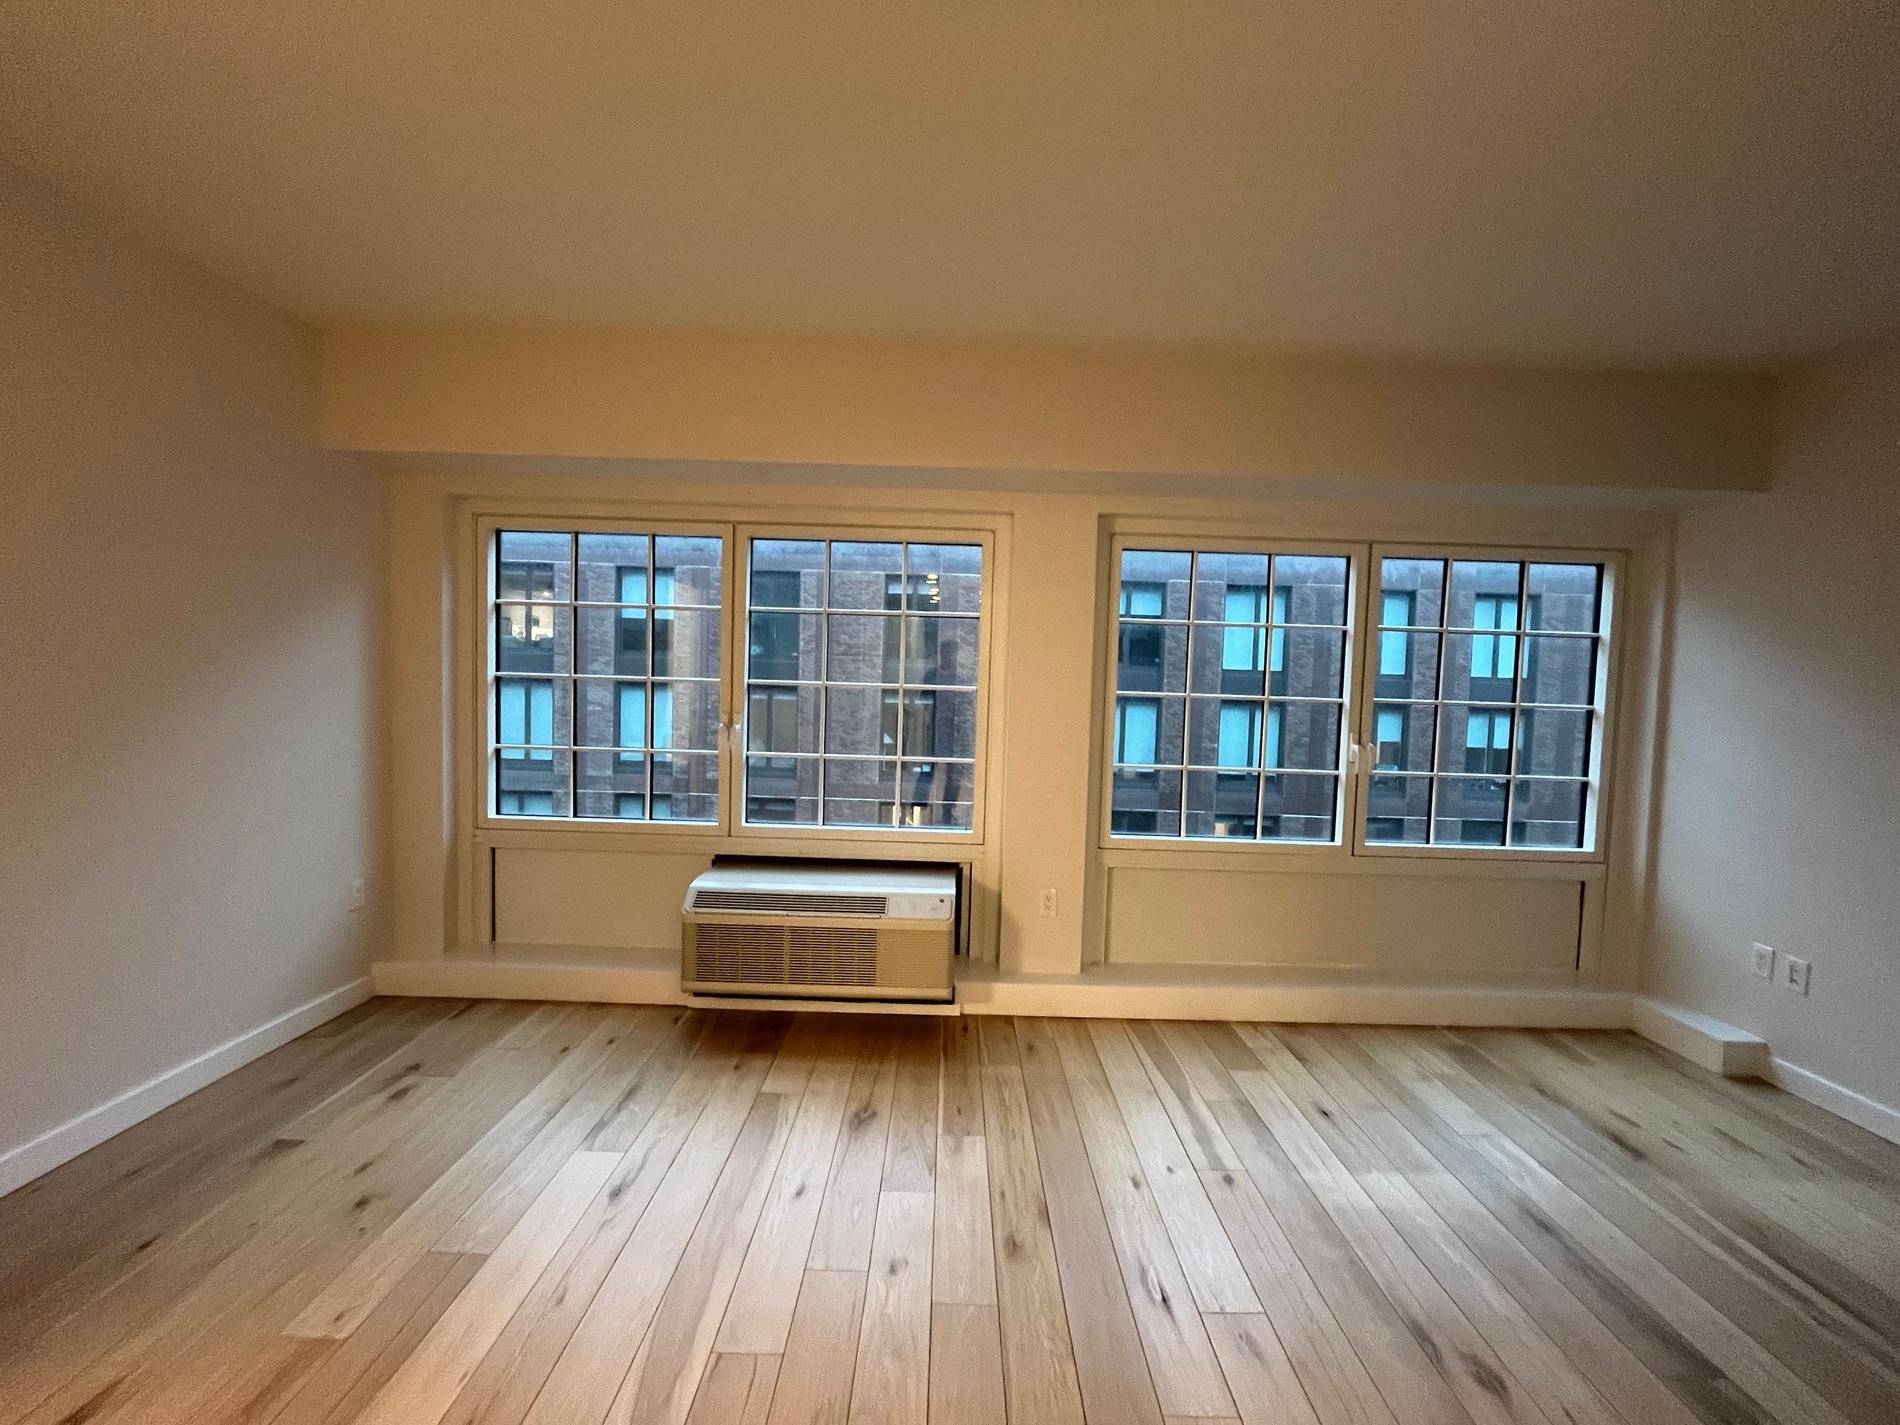 High Floor Alcove Studio Moments from the lush beauty of Prospect Park and central to all that Brooklyn has to offer, 555 Waverly represents the very best of the Brooklyn ...